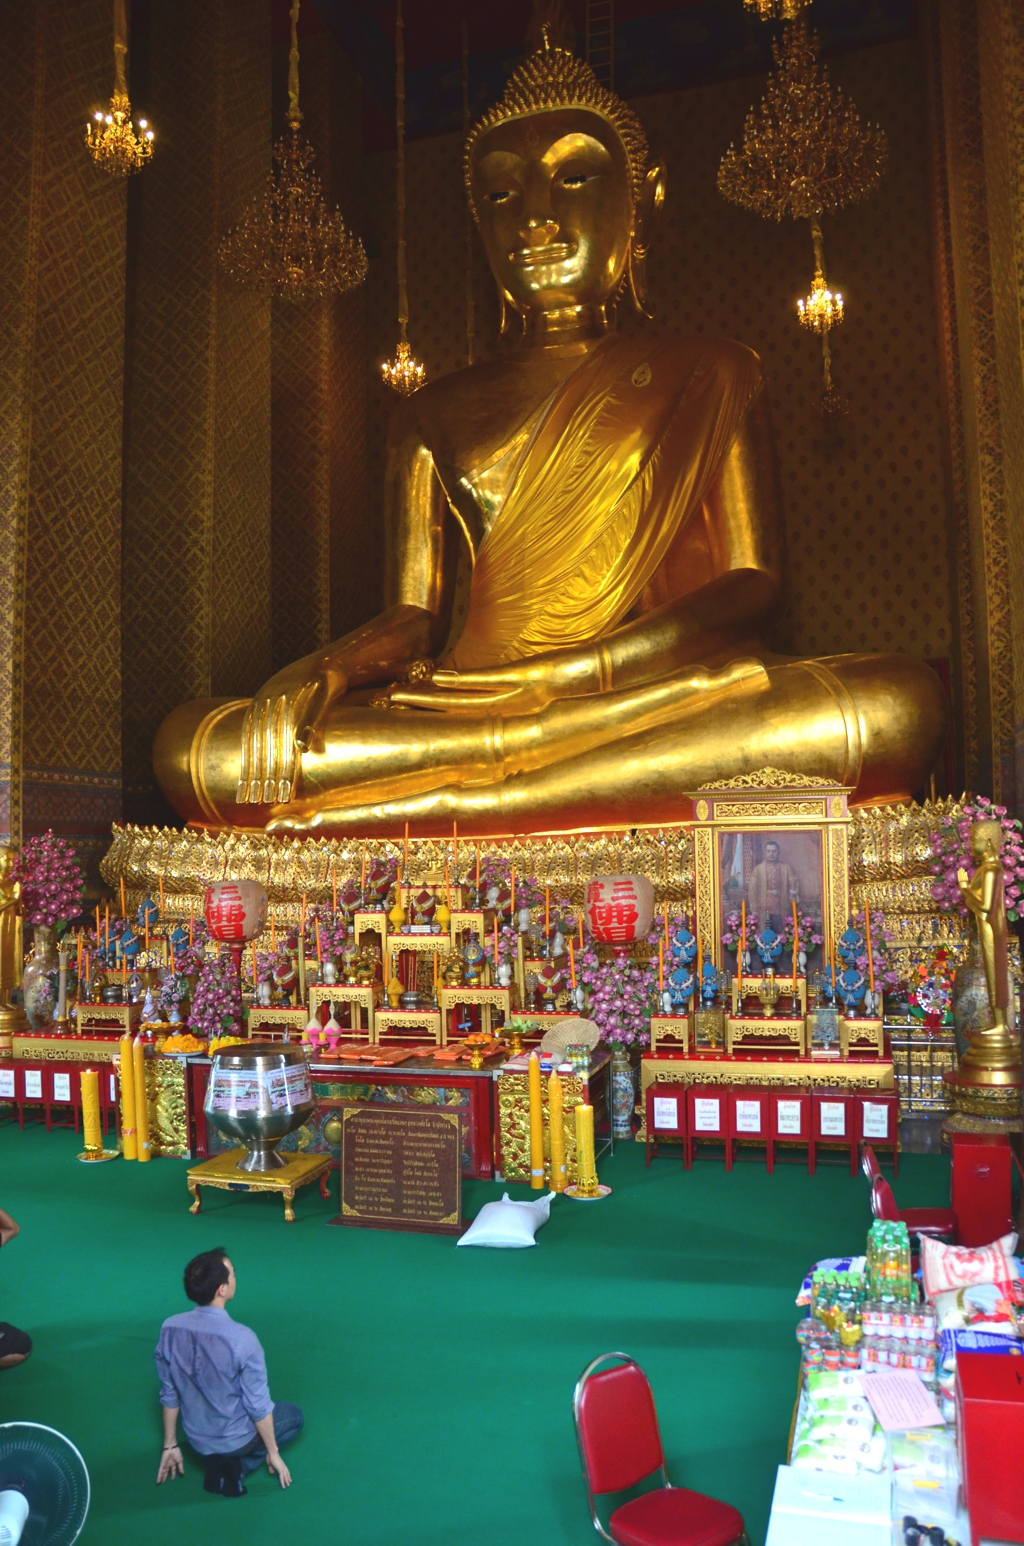 The Buddha image at Wat Kalayanamitr isn't very different from those you find elsewhere in Bangkok, but you're almost guaranteed to be the only Westerner here